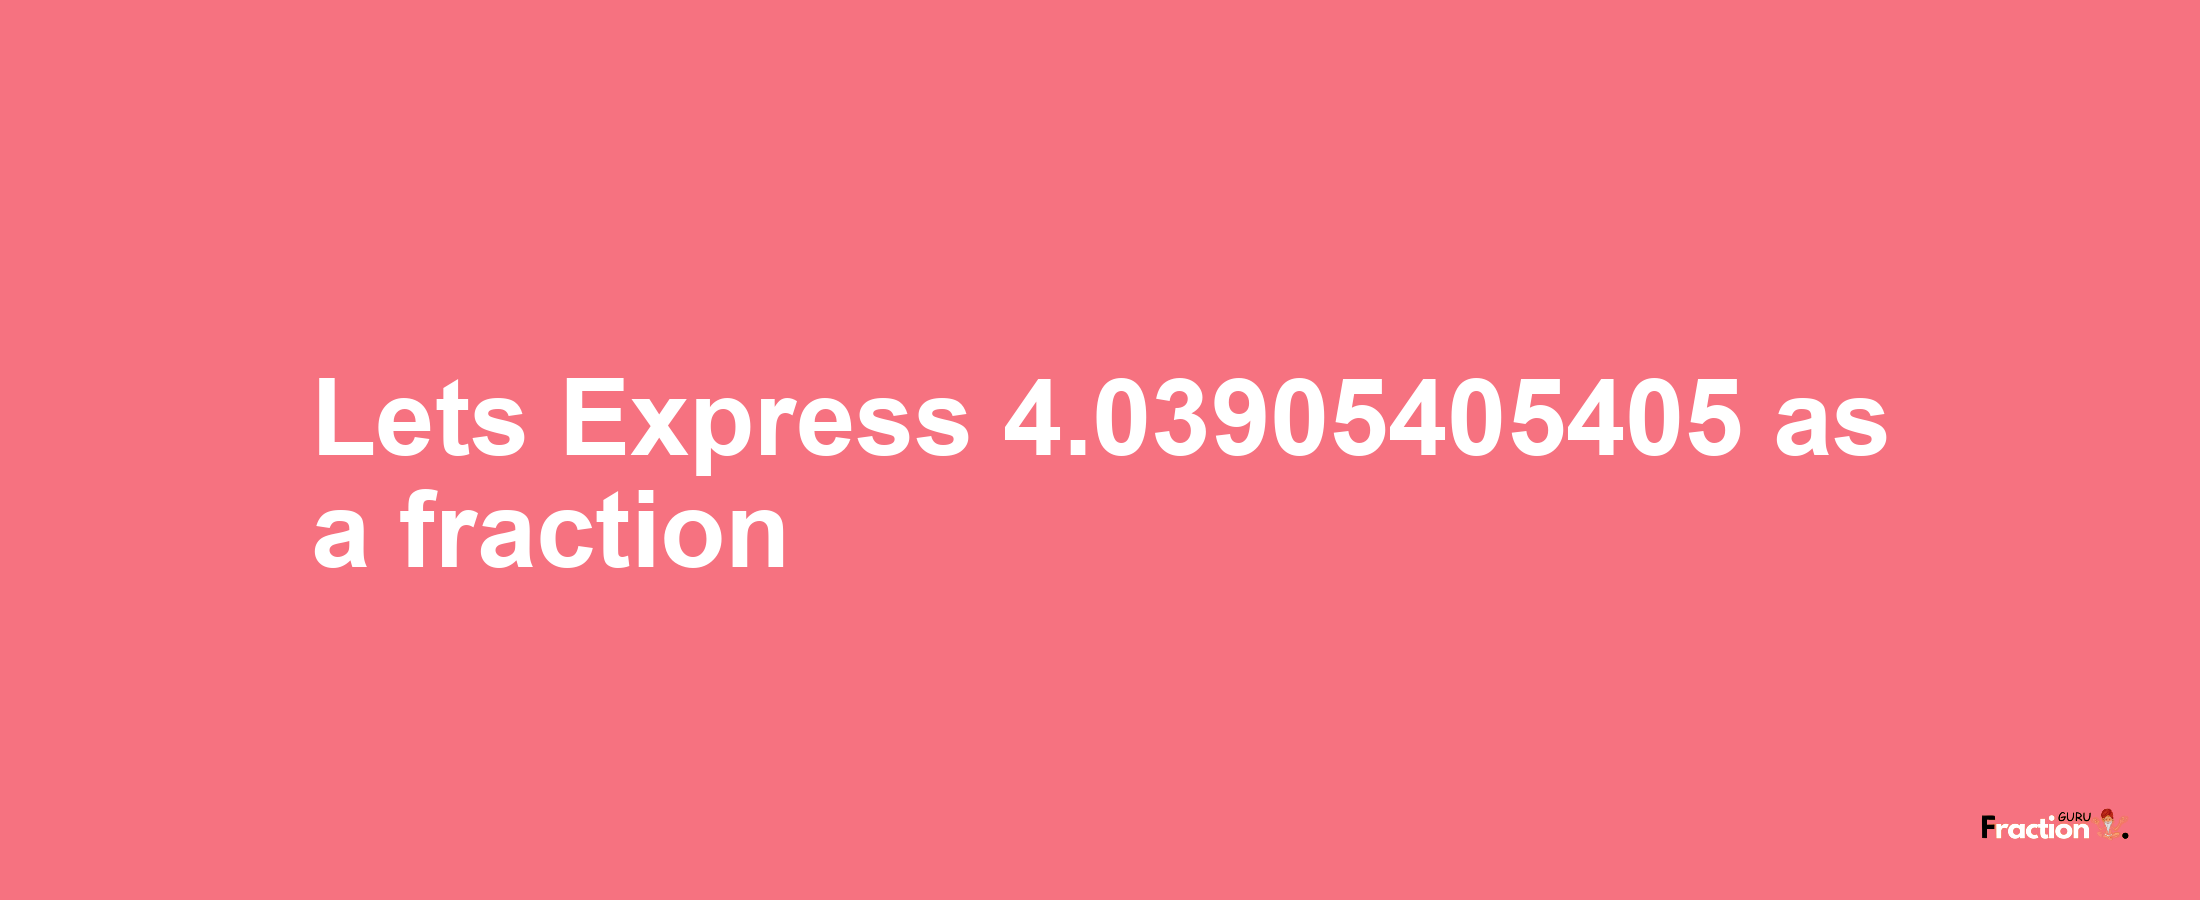 Lets Express 4.03905405405 as afraction